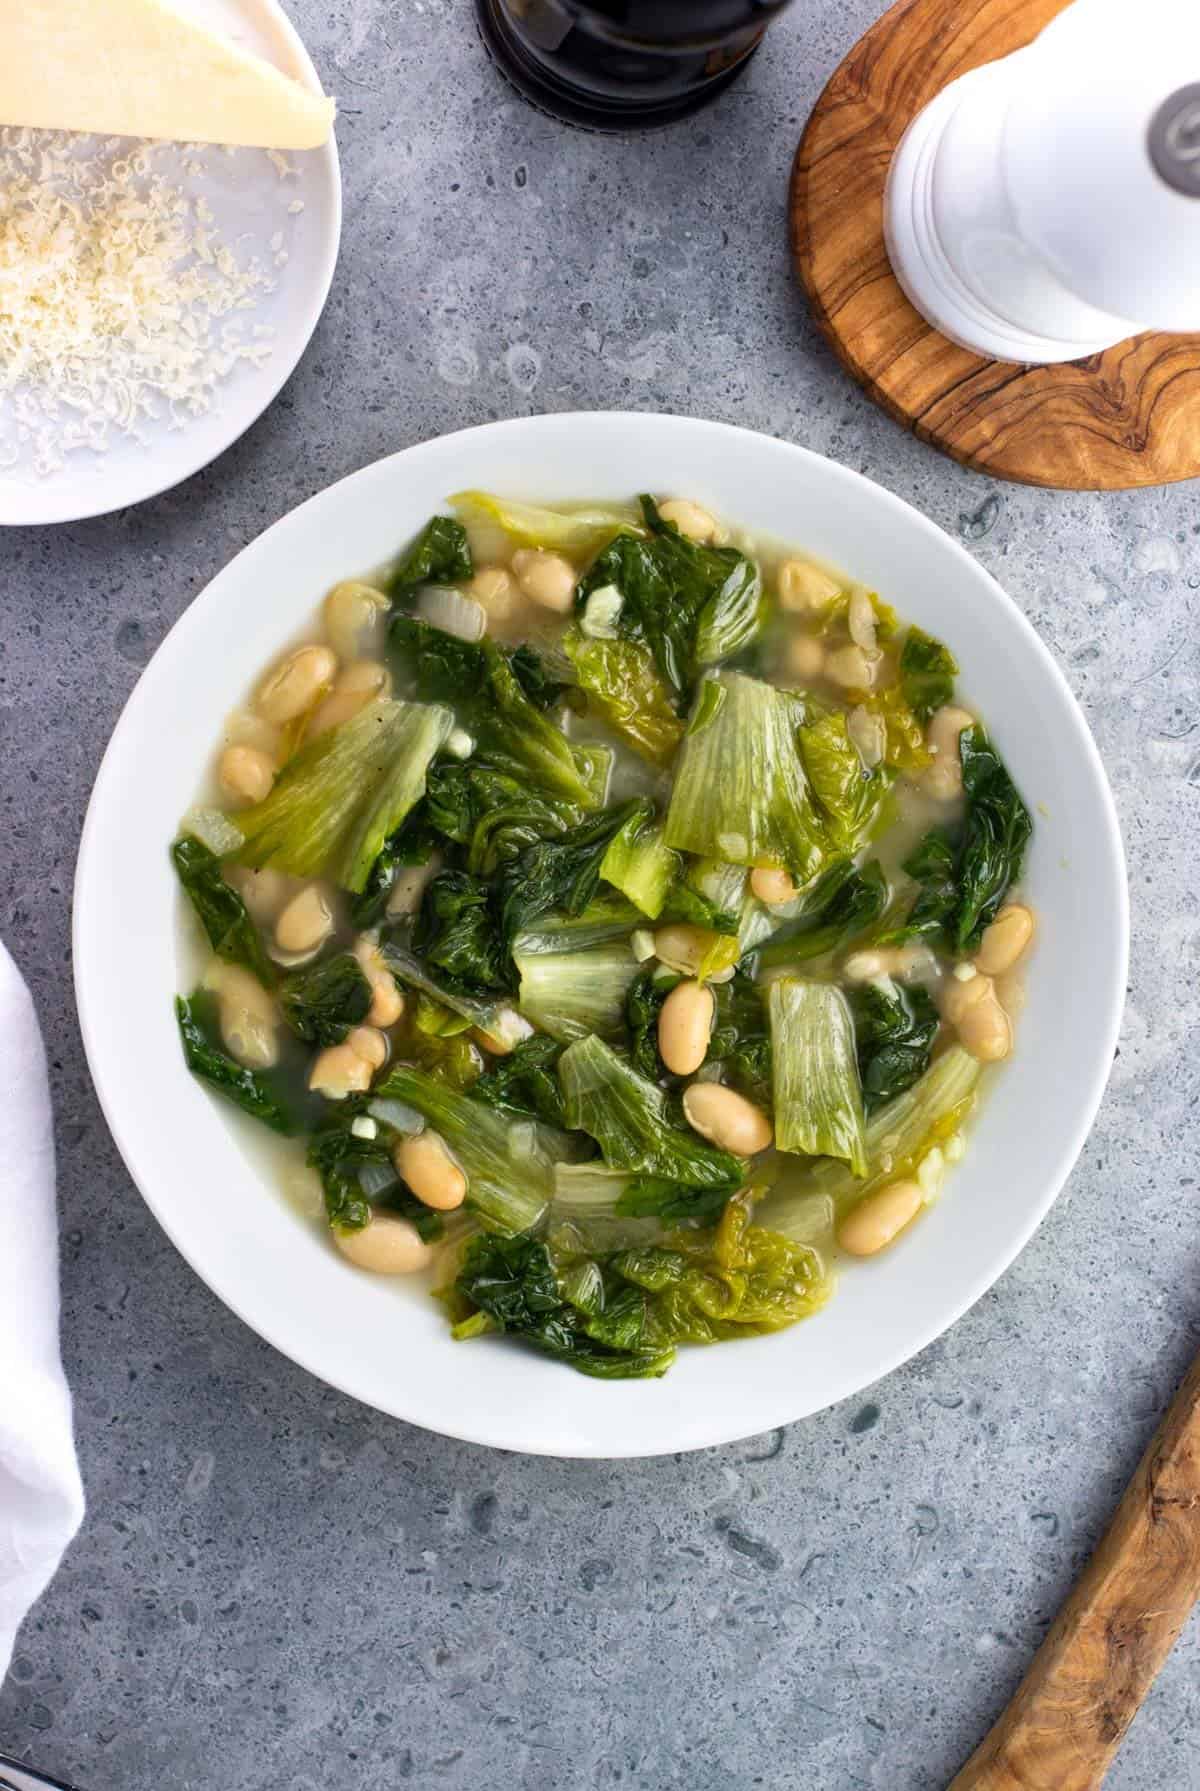 A serving of escarole and beans in a bowl surrounded by a grated wedge of Parmesan and salt and pepper mills.